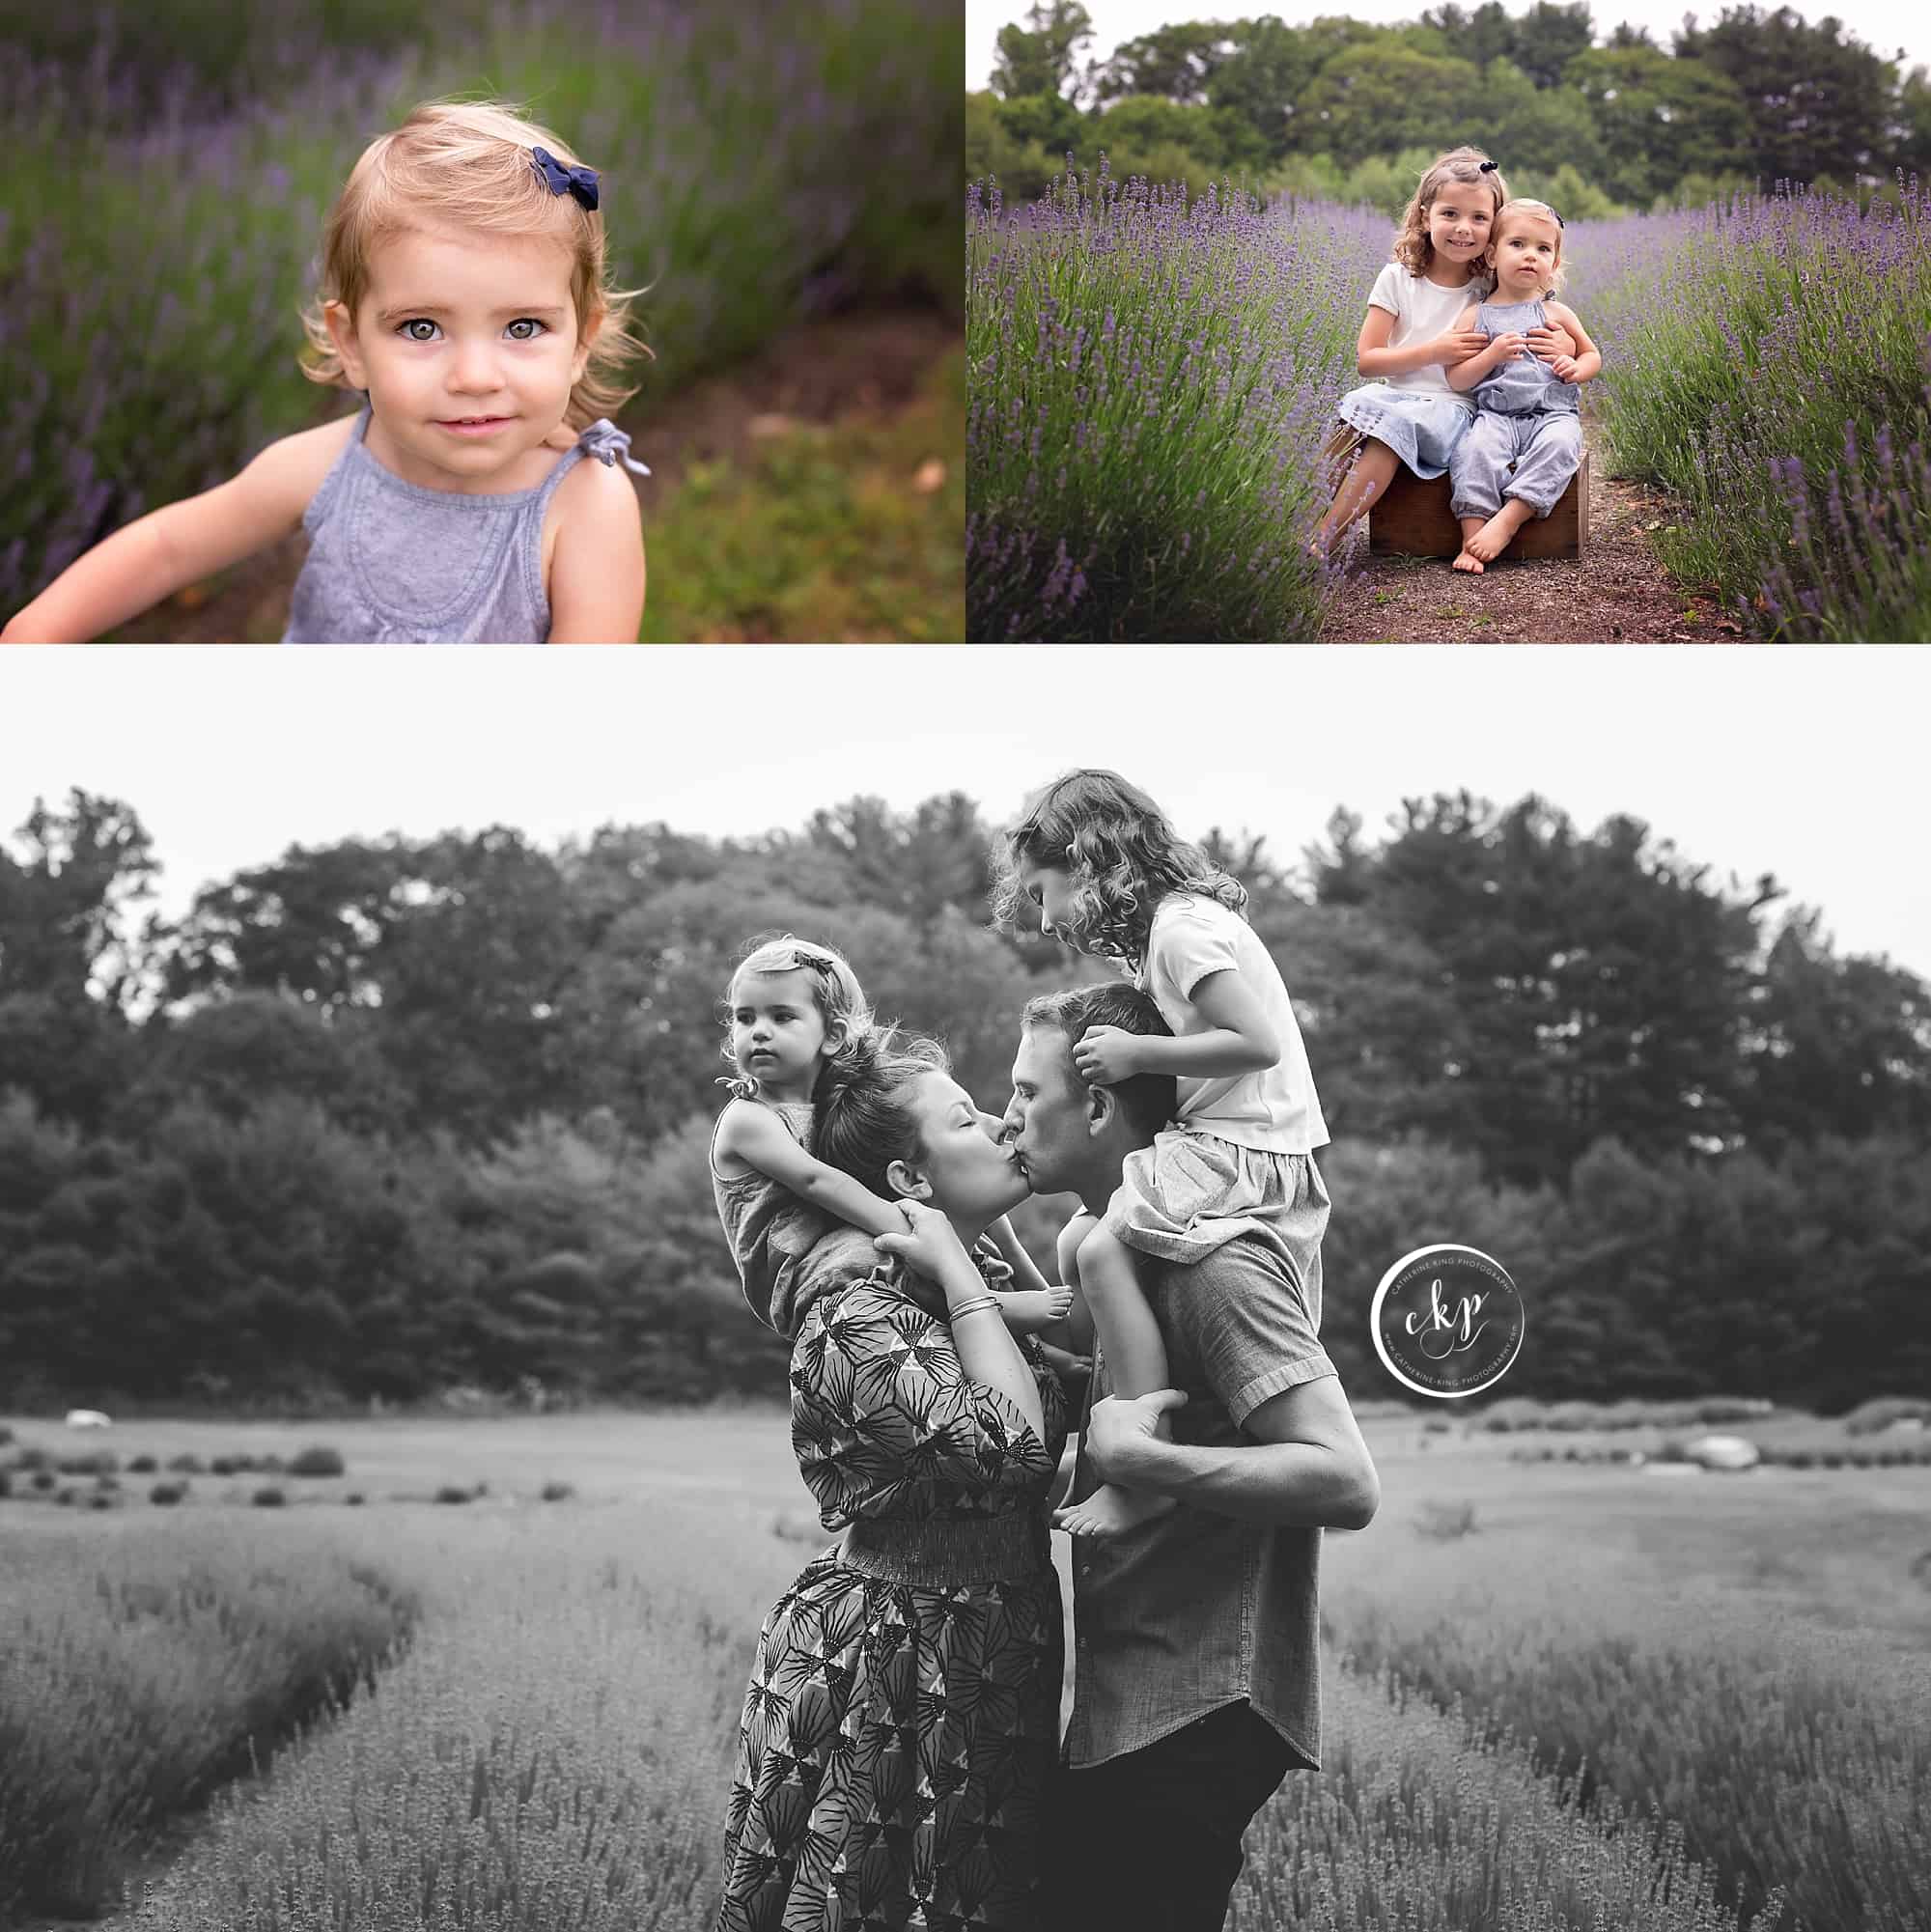 Lavender Family Photography in Kiliingworth CT with Catherine King Photography, a CT Family Photographer